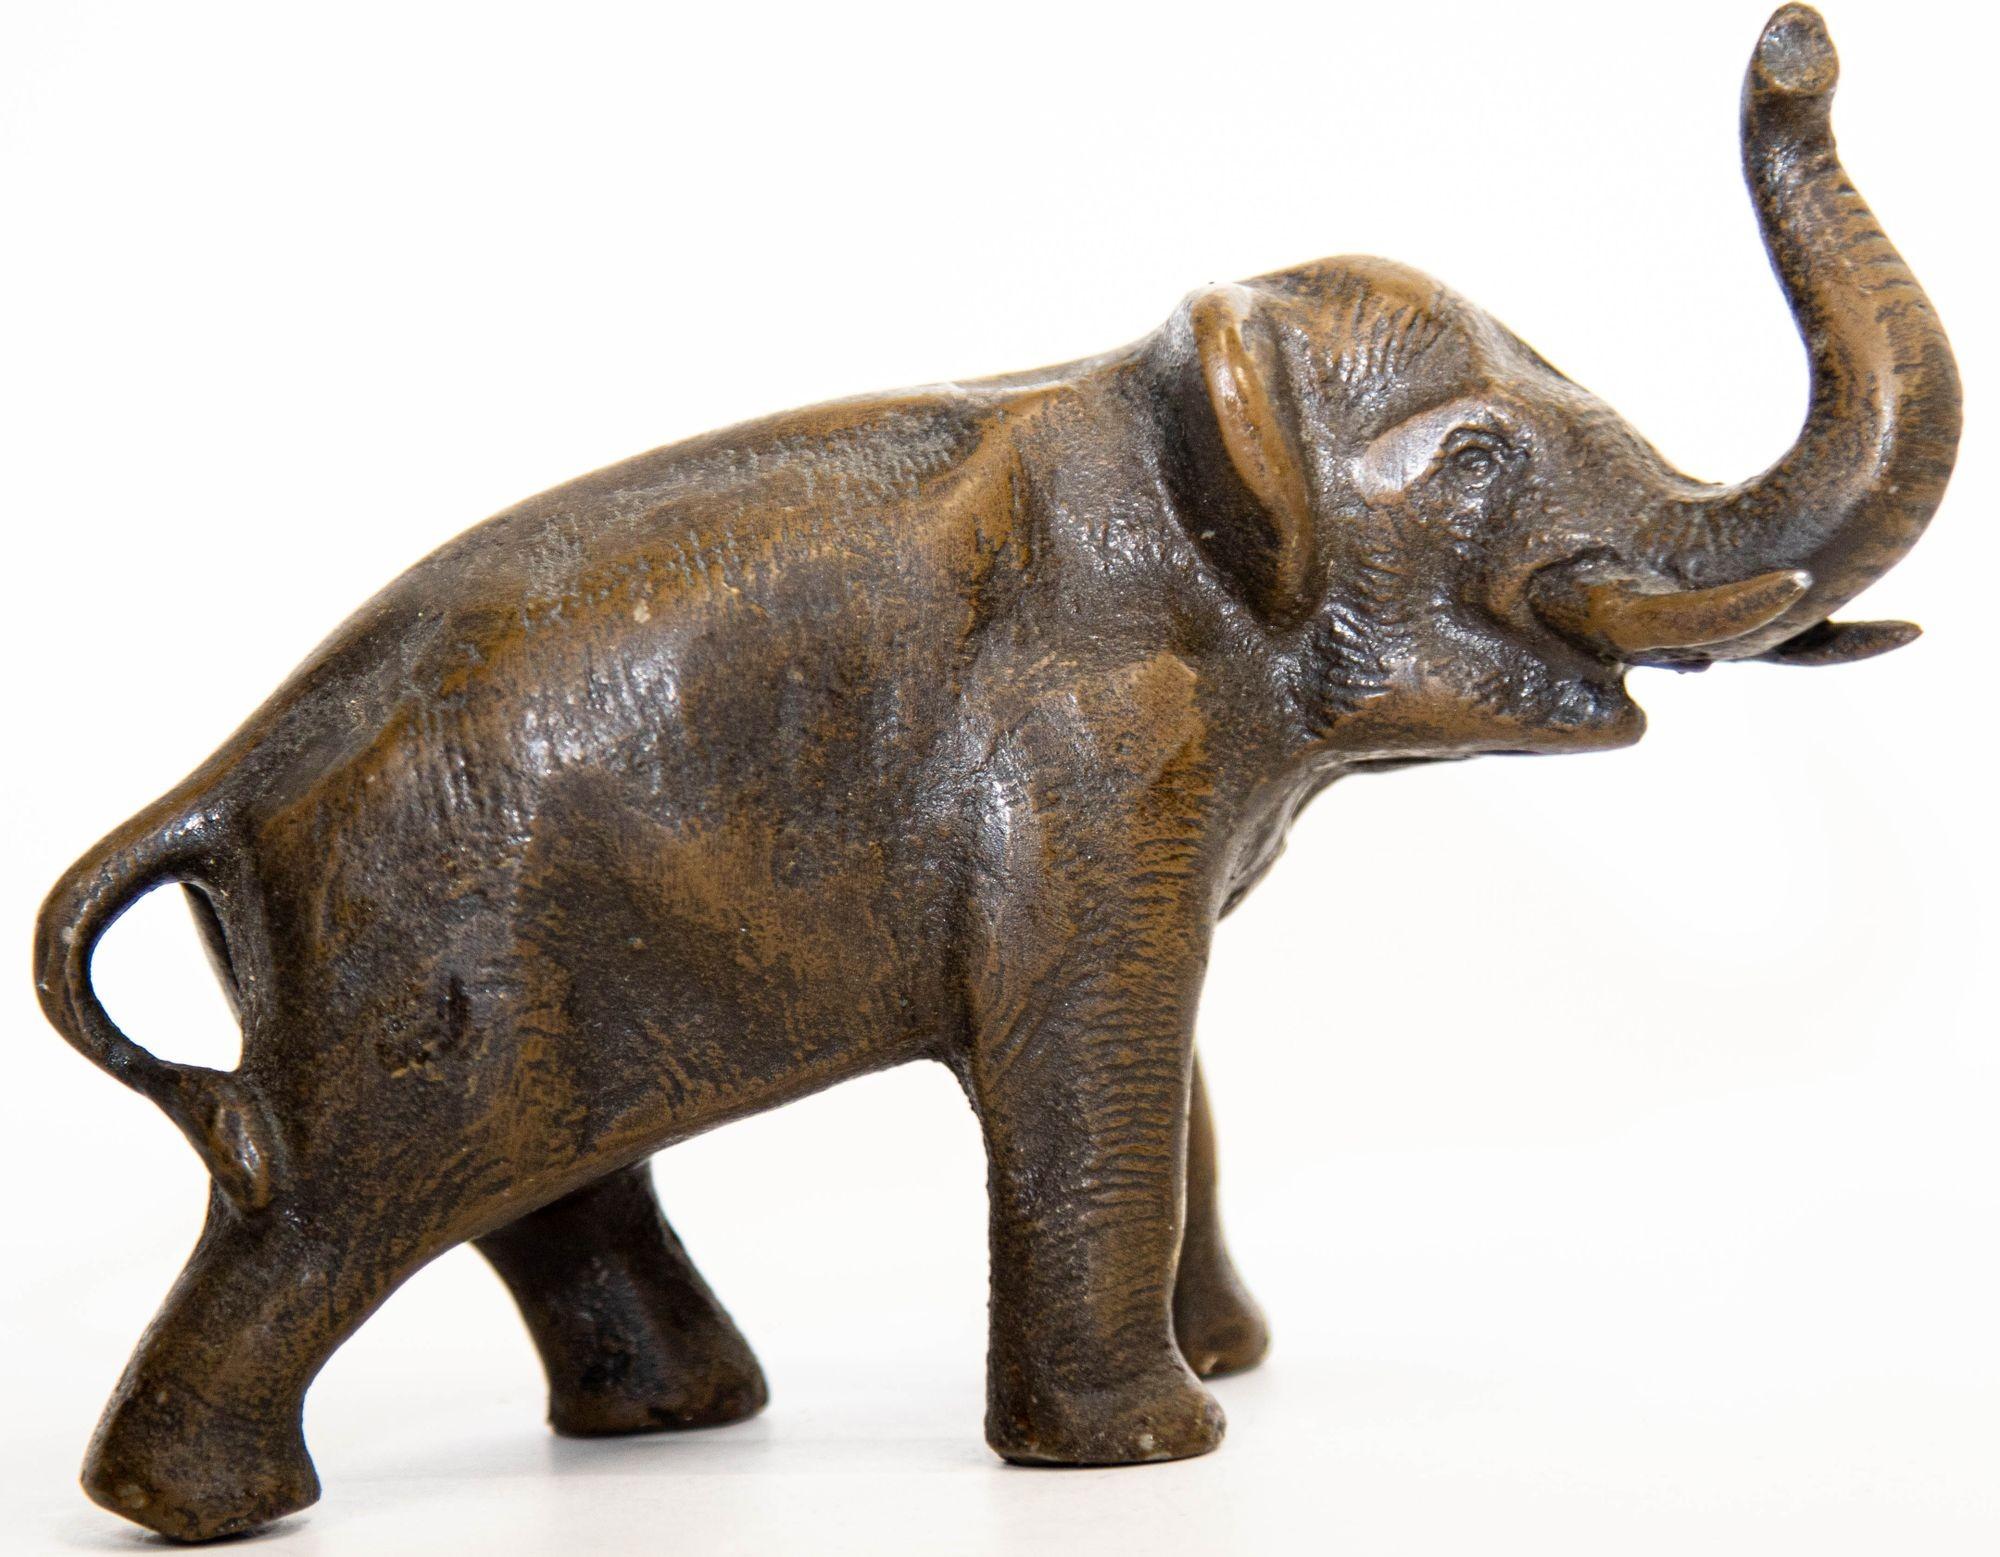 Beautiful Oriental Japanese Meiji period style bronze sculpture of a walking elephant with his trunk up.
Well casted metal art, heavy, bronze elephant in a dark brown copper finish.
Elephant figurine statue in a triumphant pose, will make an